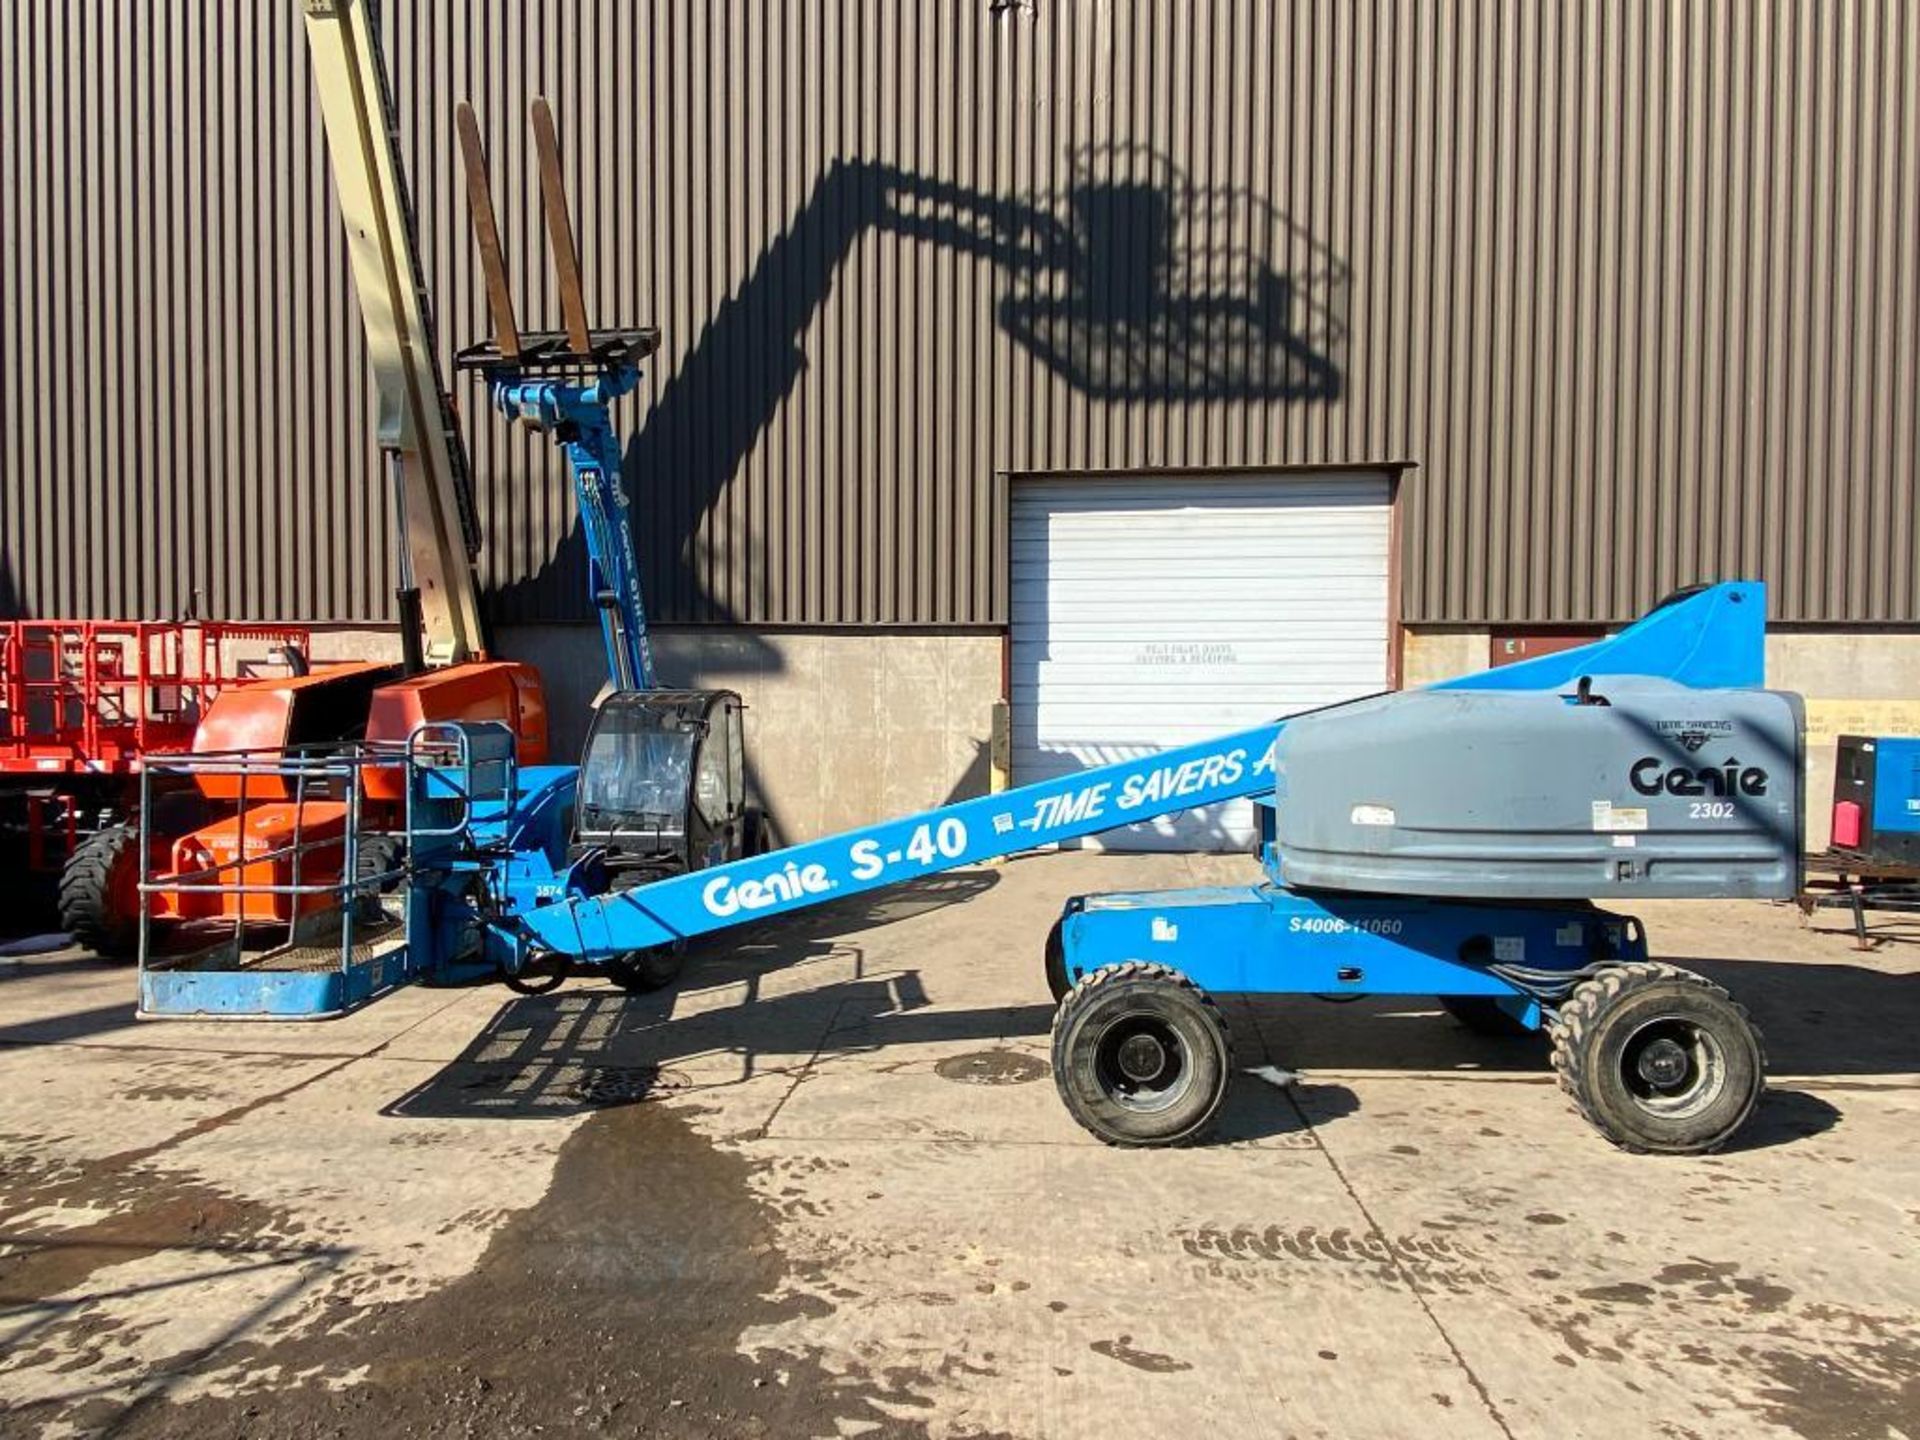 Genie S-40 Rough Terrain Boom Lift (S/N S4006-11060, Year 2006), with 40' Platform Height, 500 Lb. - Image 5 of 9